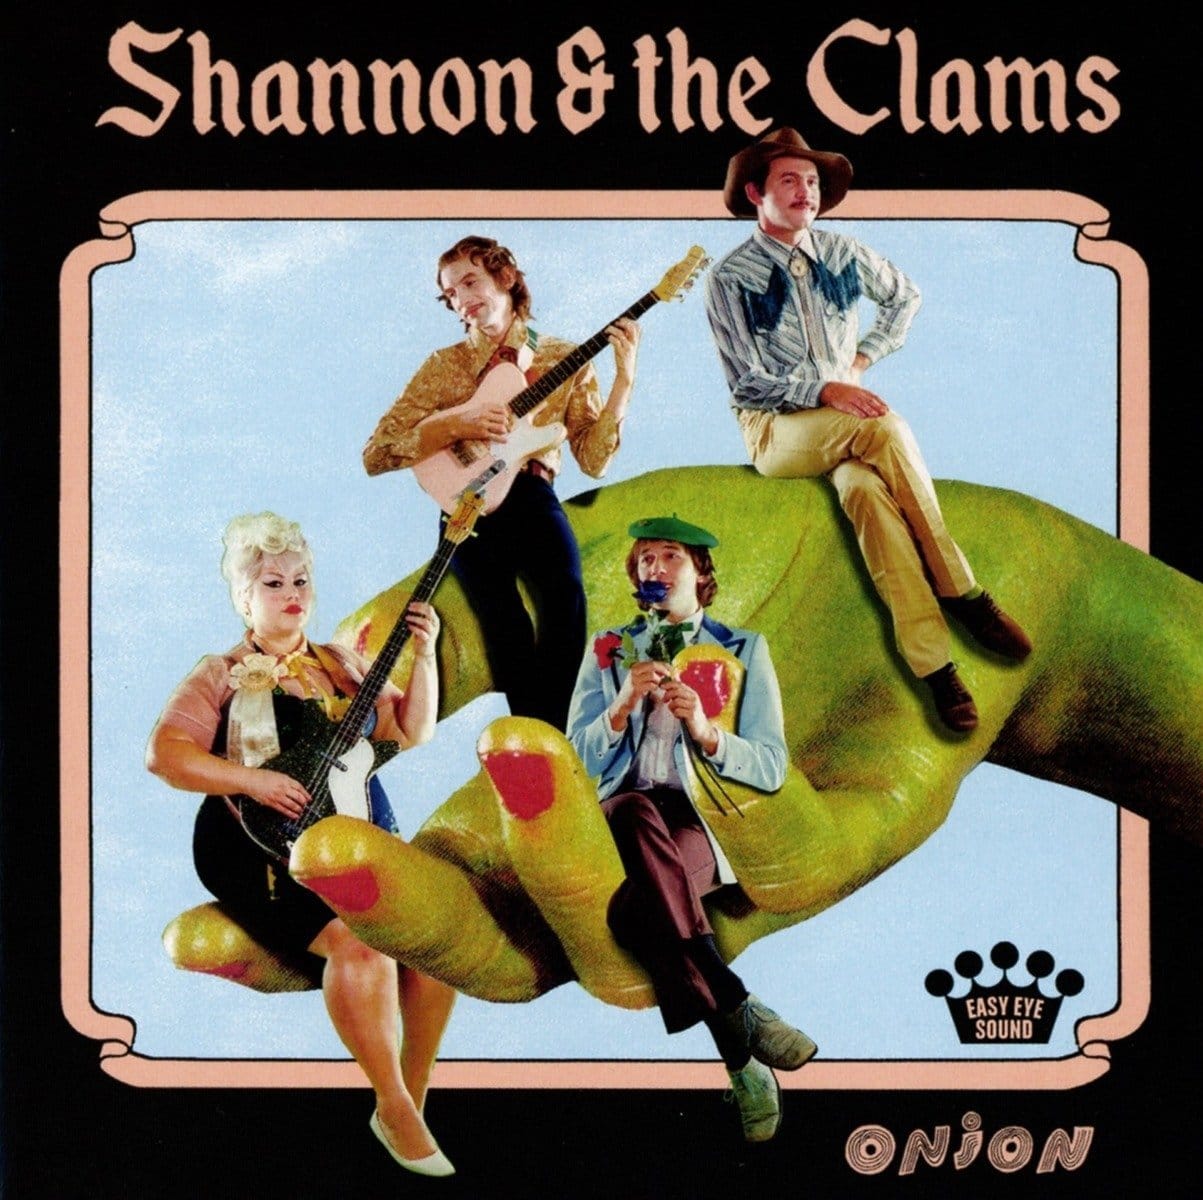 Shannon and the Clams: Onion